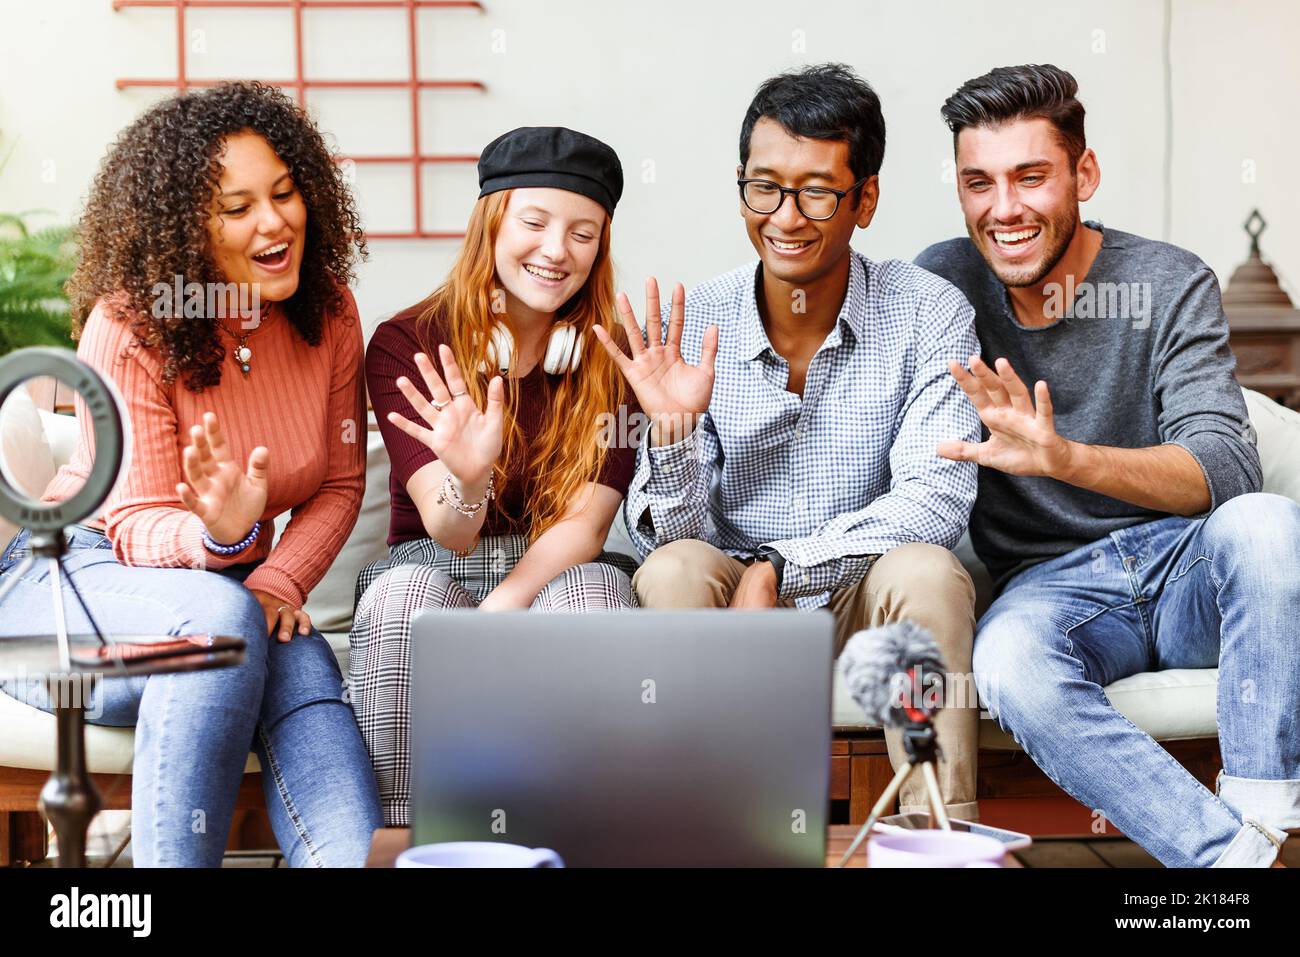 Group of positive multiracial friends waving hands while having video call via laptop on table with microphone and ring lamp Stock Photo